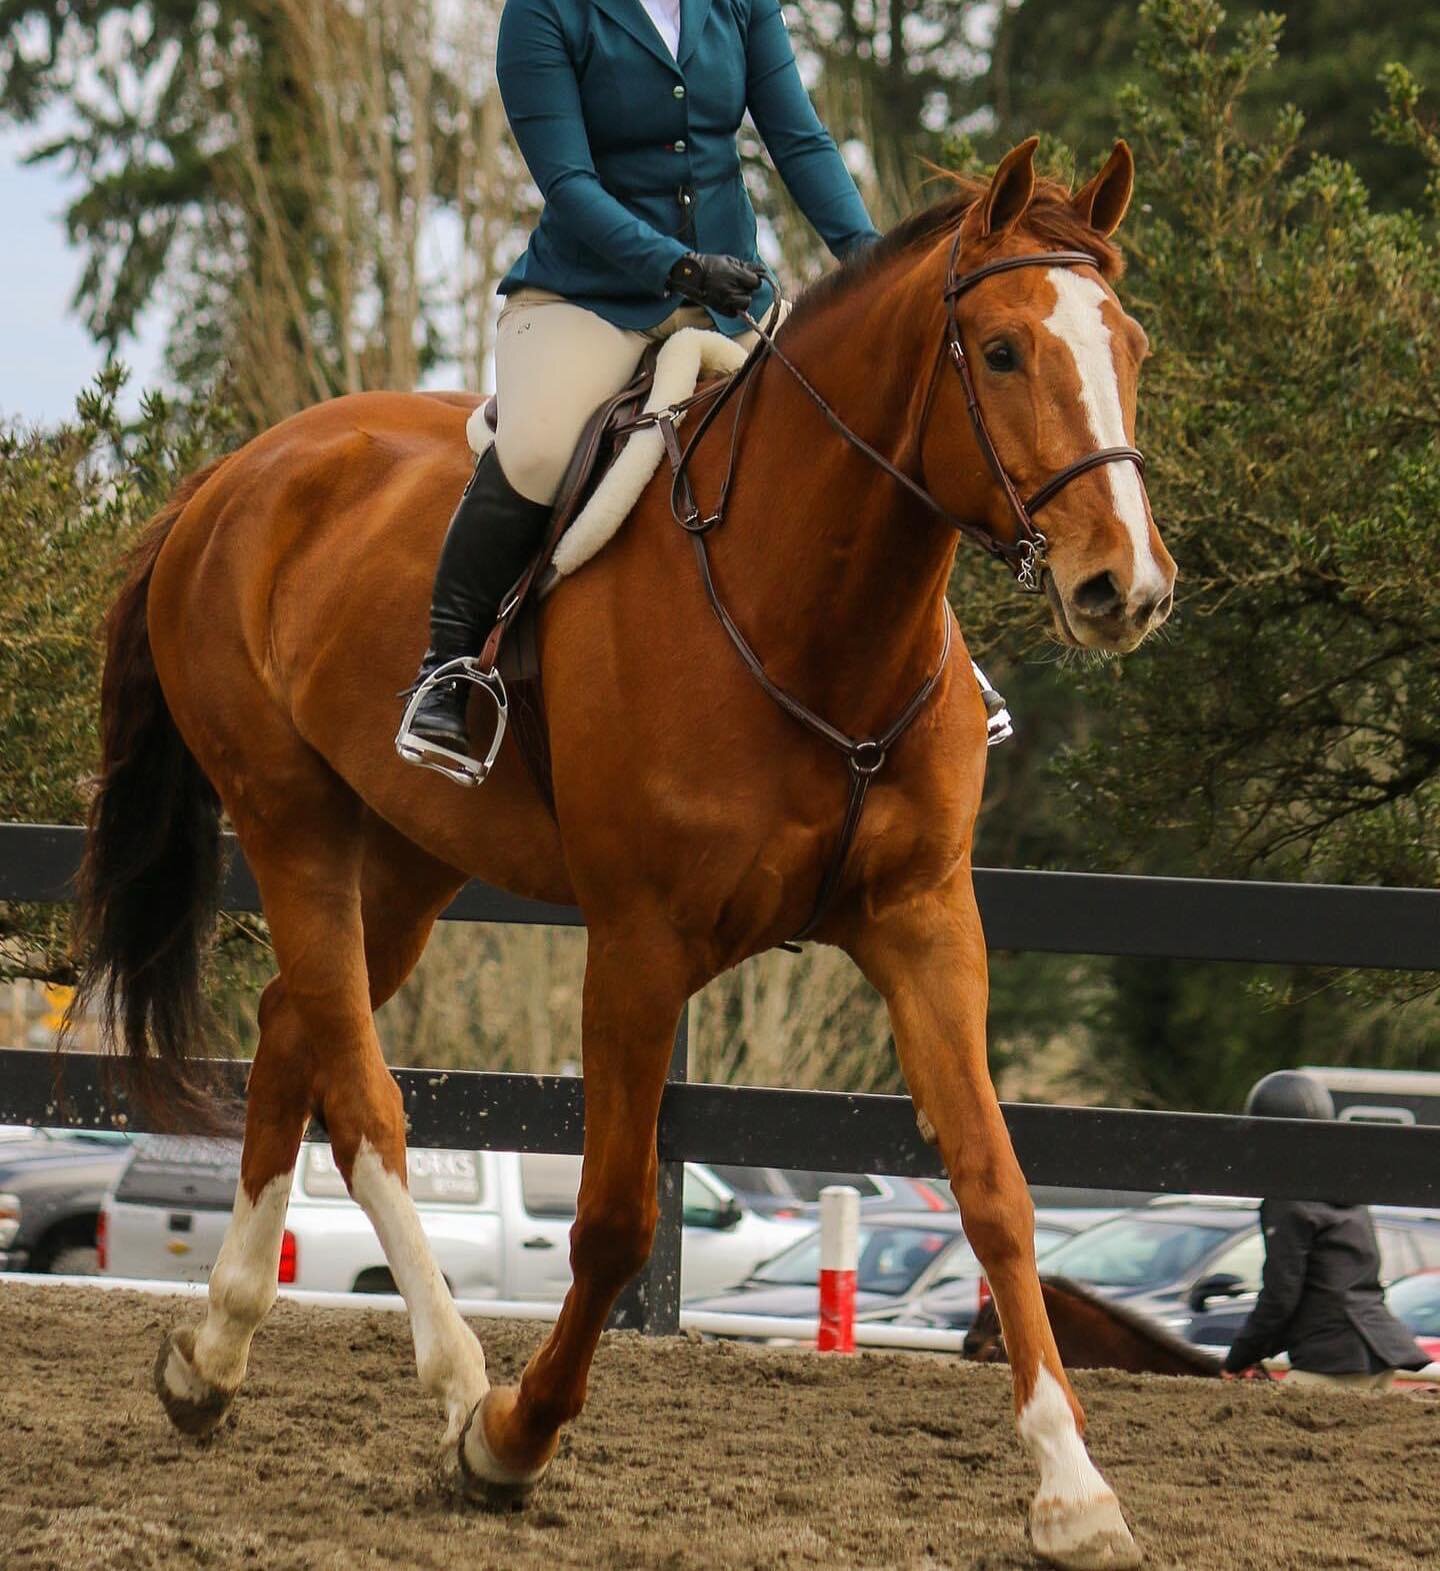 We have several horses of varying levels available for half lease in barn! One is for sale or lease to the right home. 

- 18hh 6yr old Holsteiner mare, three ring horse, beautiful and brave, amateur friendly but rider must be at least intermediate l